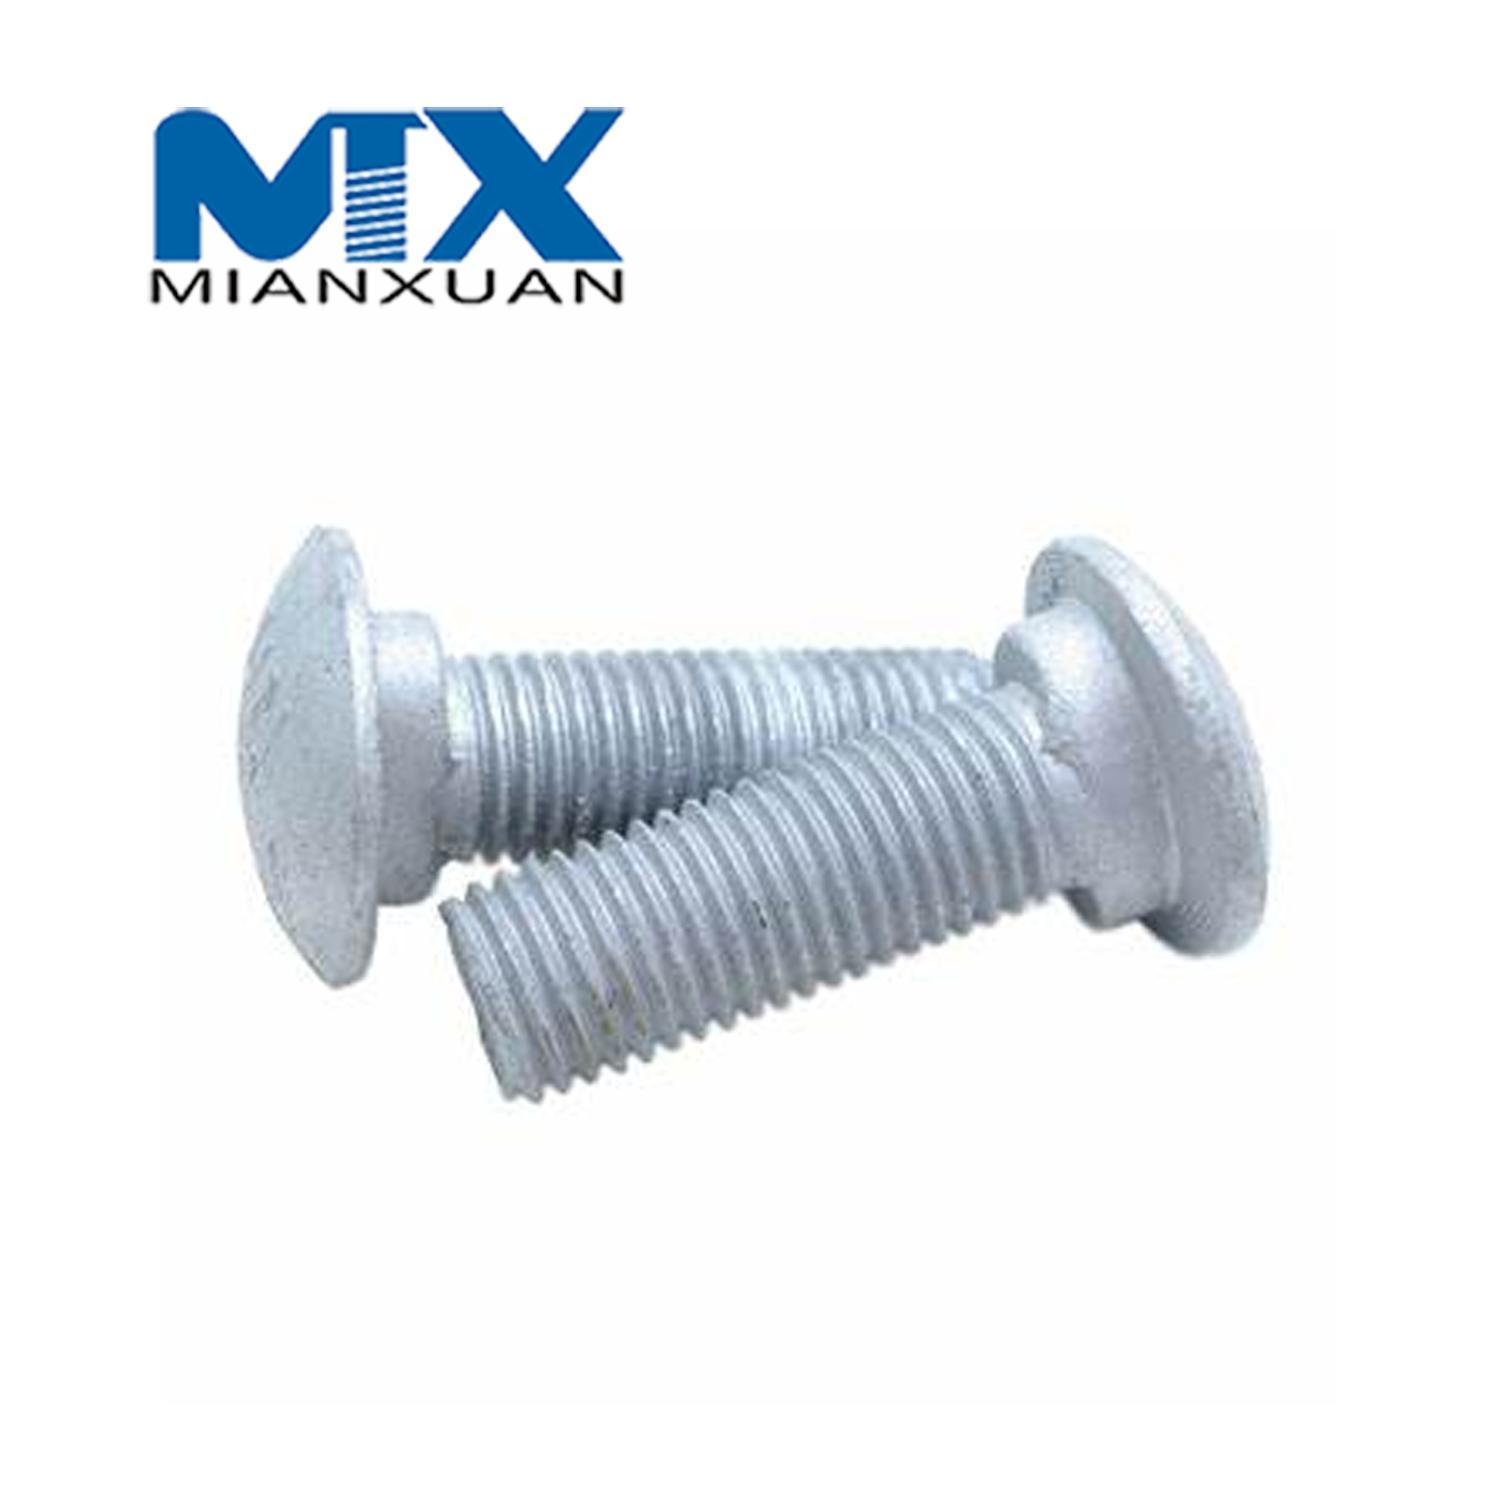 Anti-Corrosion Bolt with Hot-DIP Galvanizing